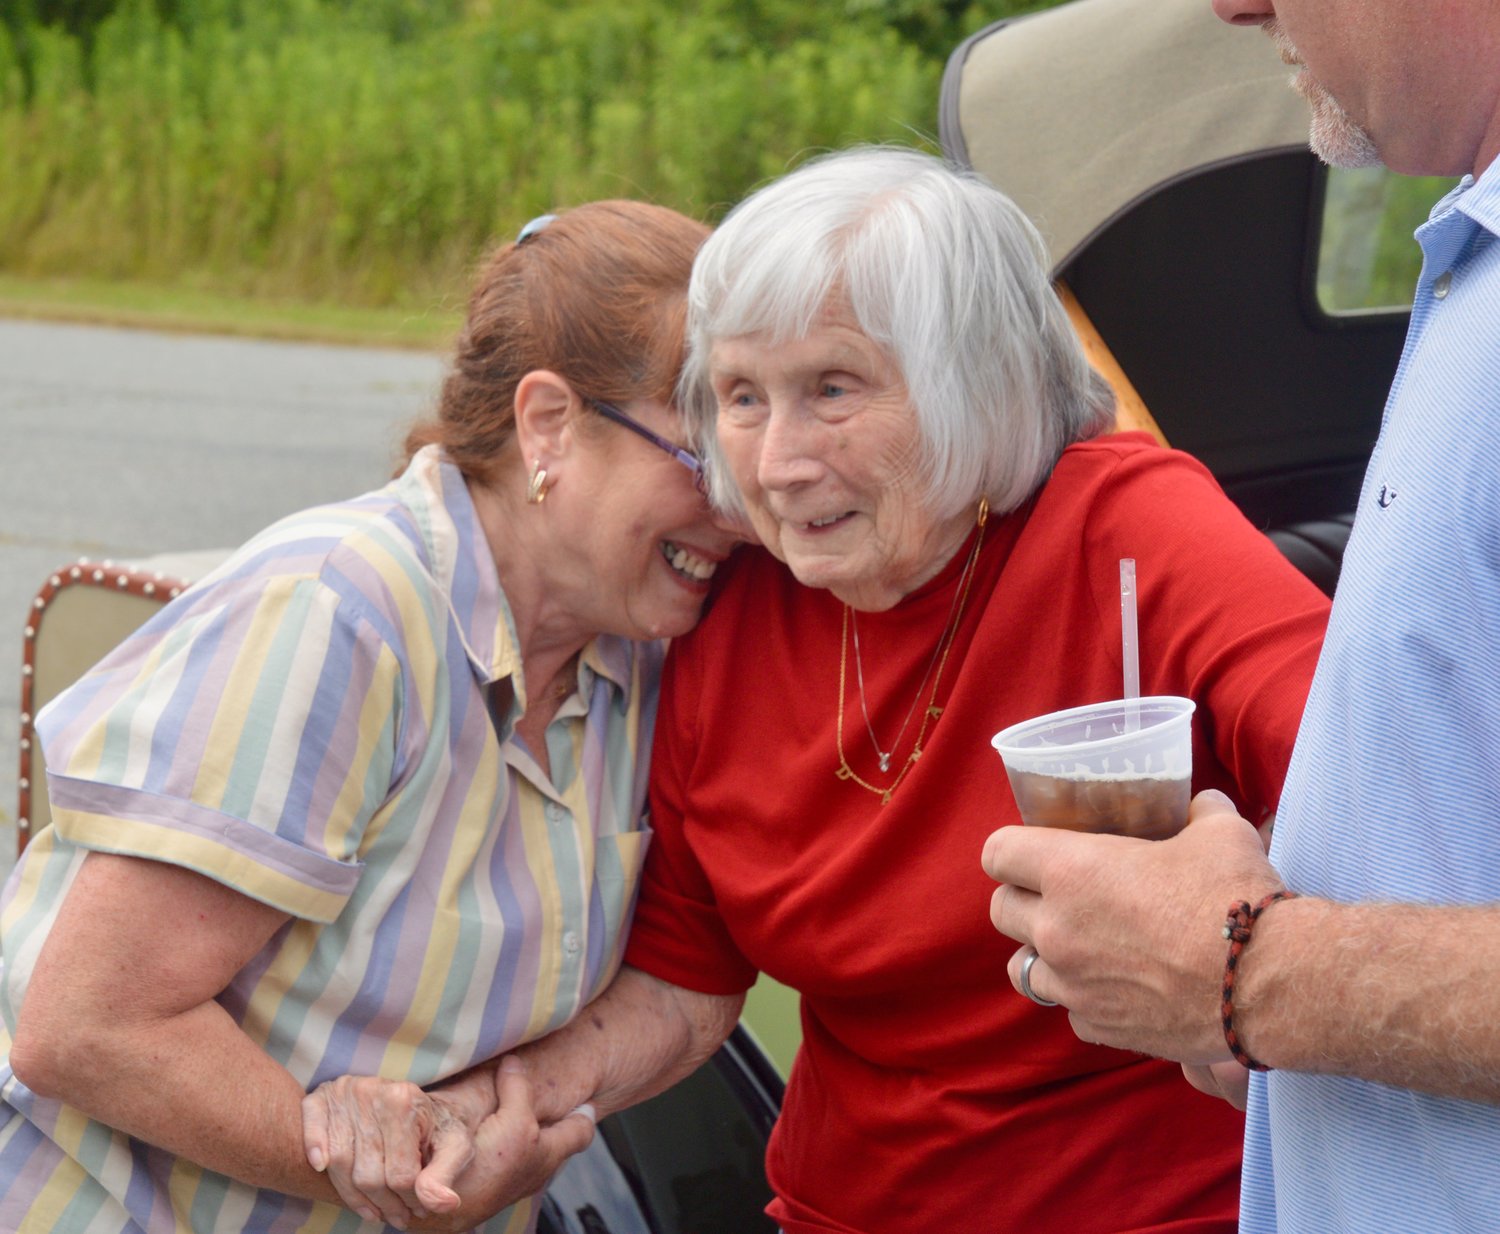 Leilani Beaudry (left) welcomes her mom, Mary Martin, upon her arrival to the party.